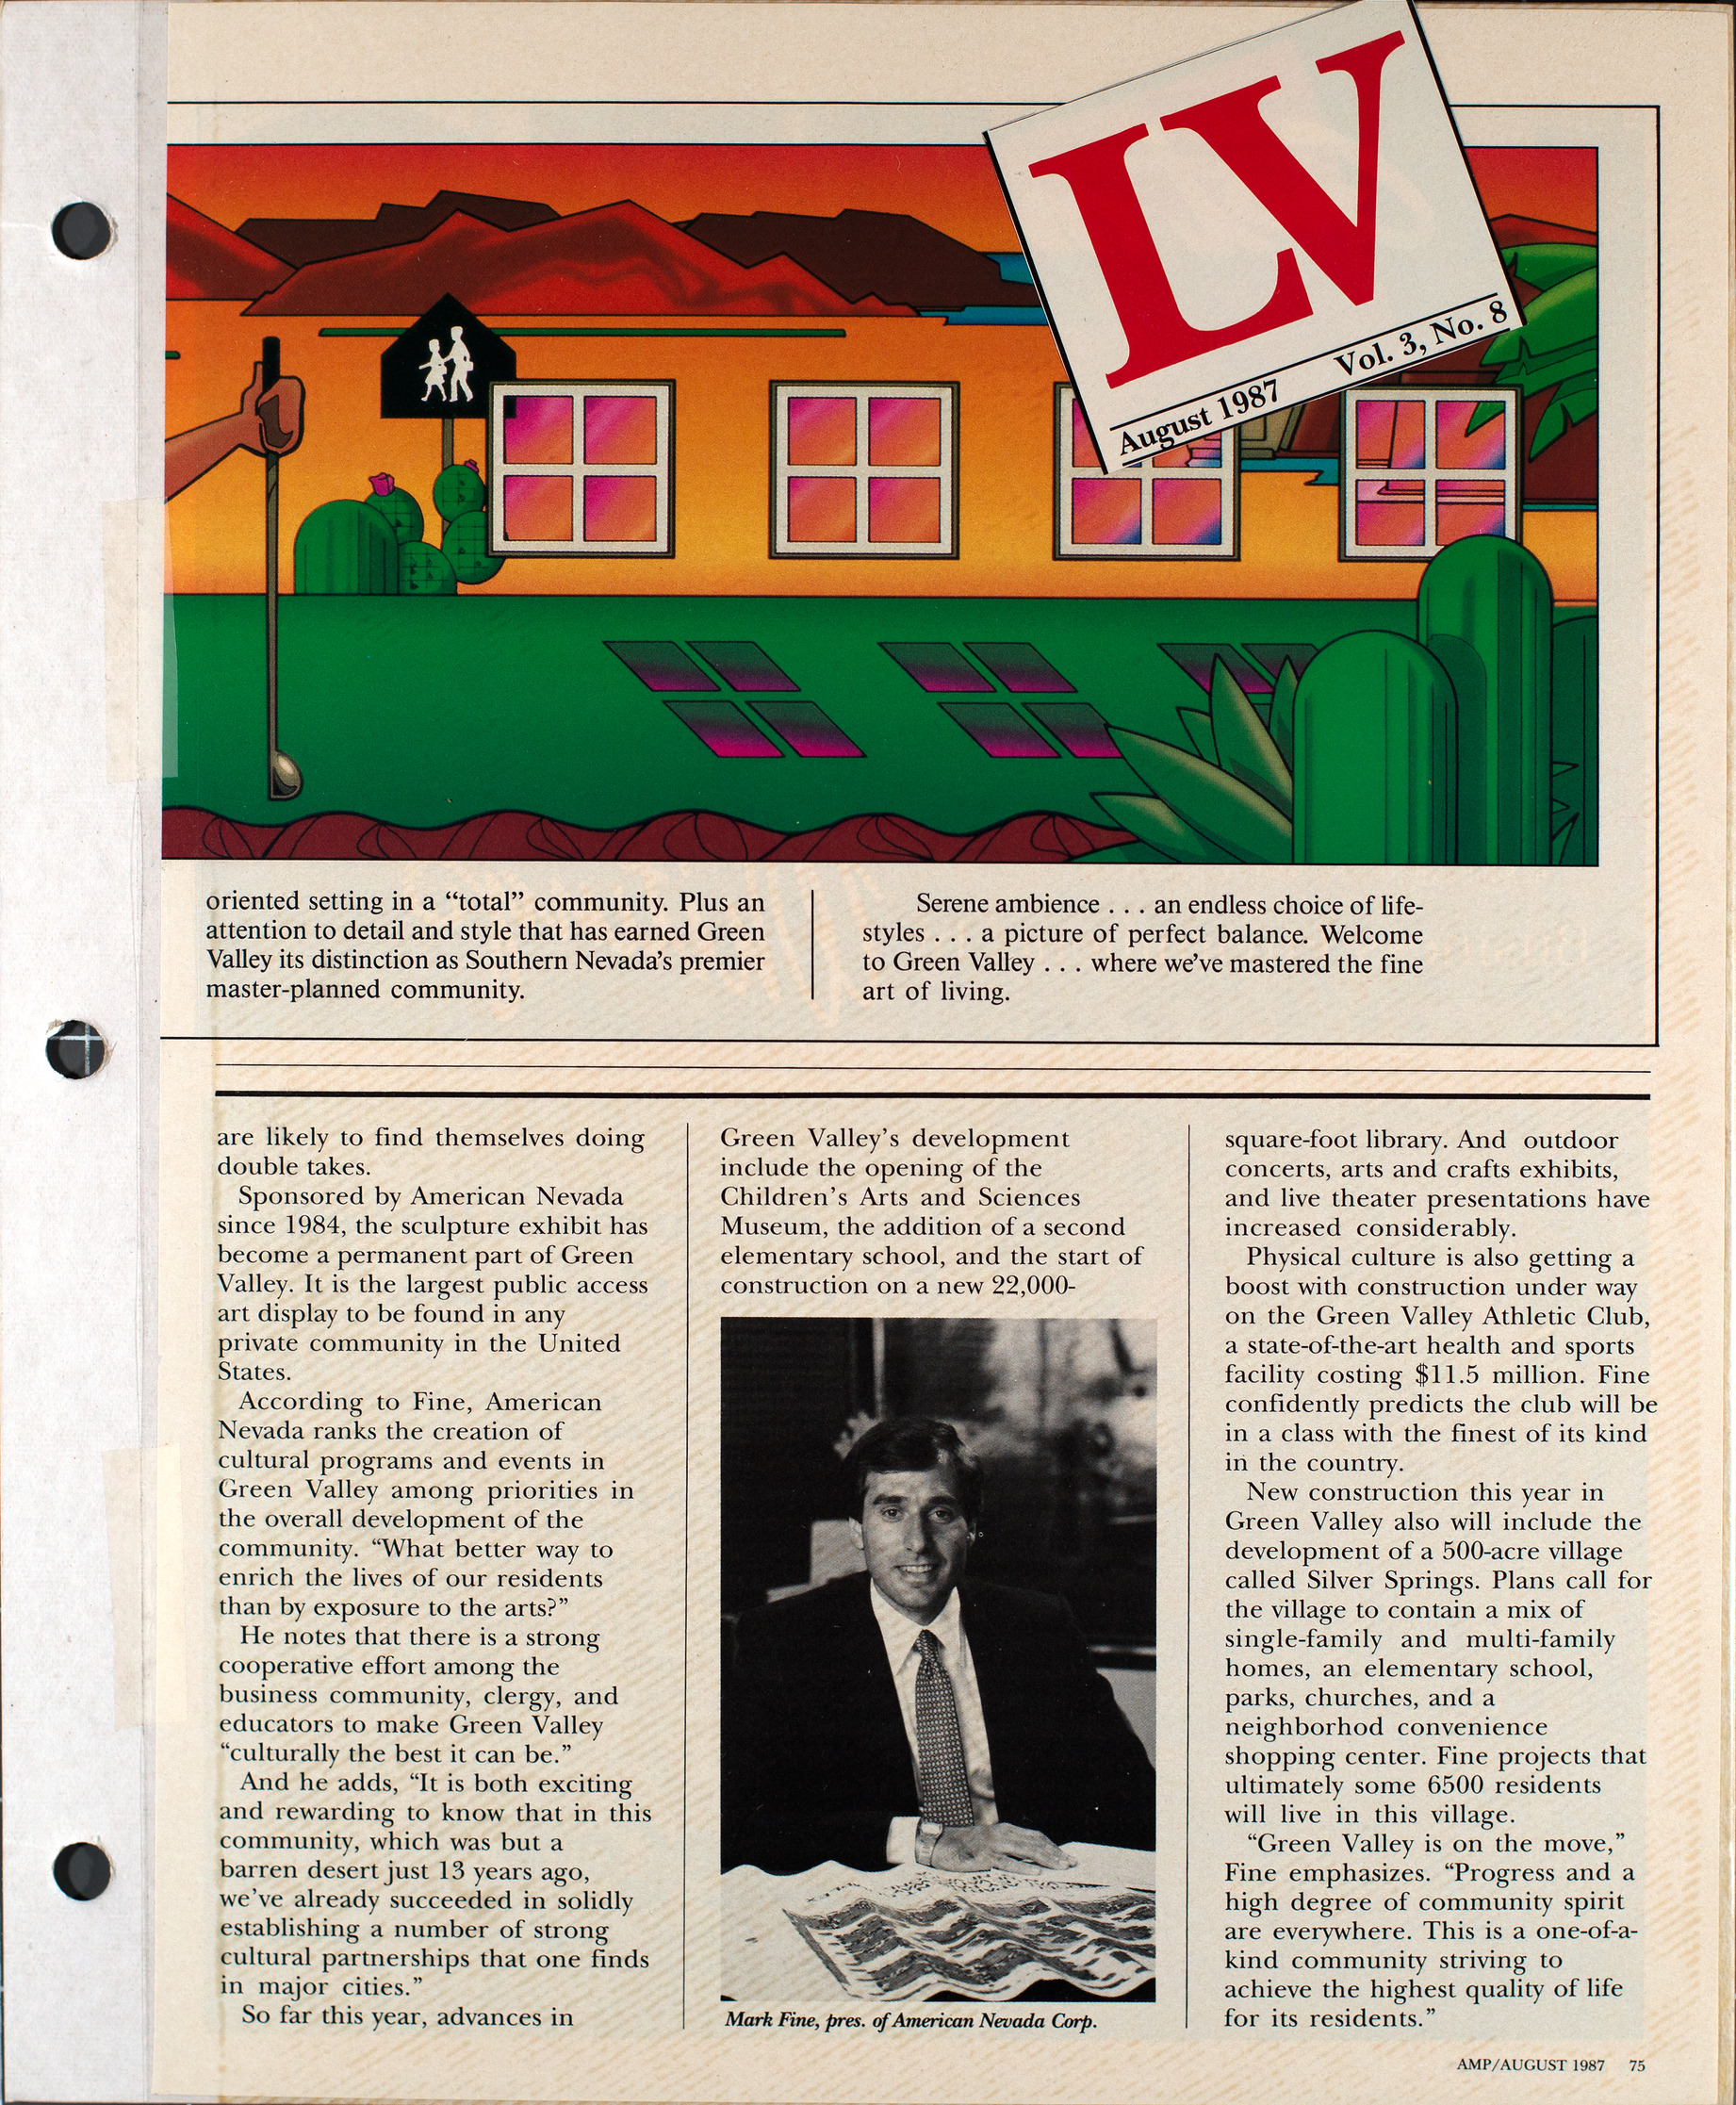 Advertisement and article about Green Valley, AMP, August 1987, page 2